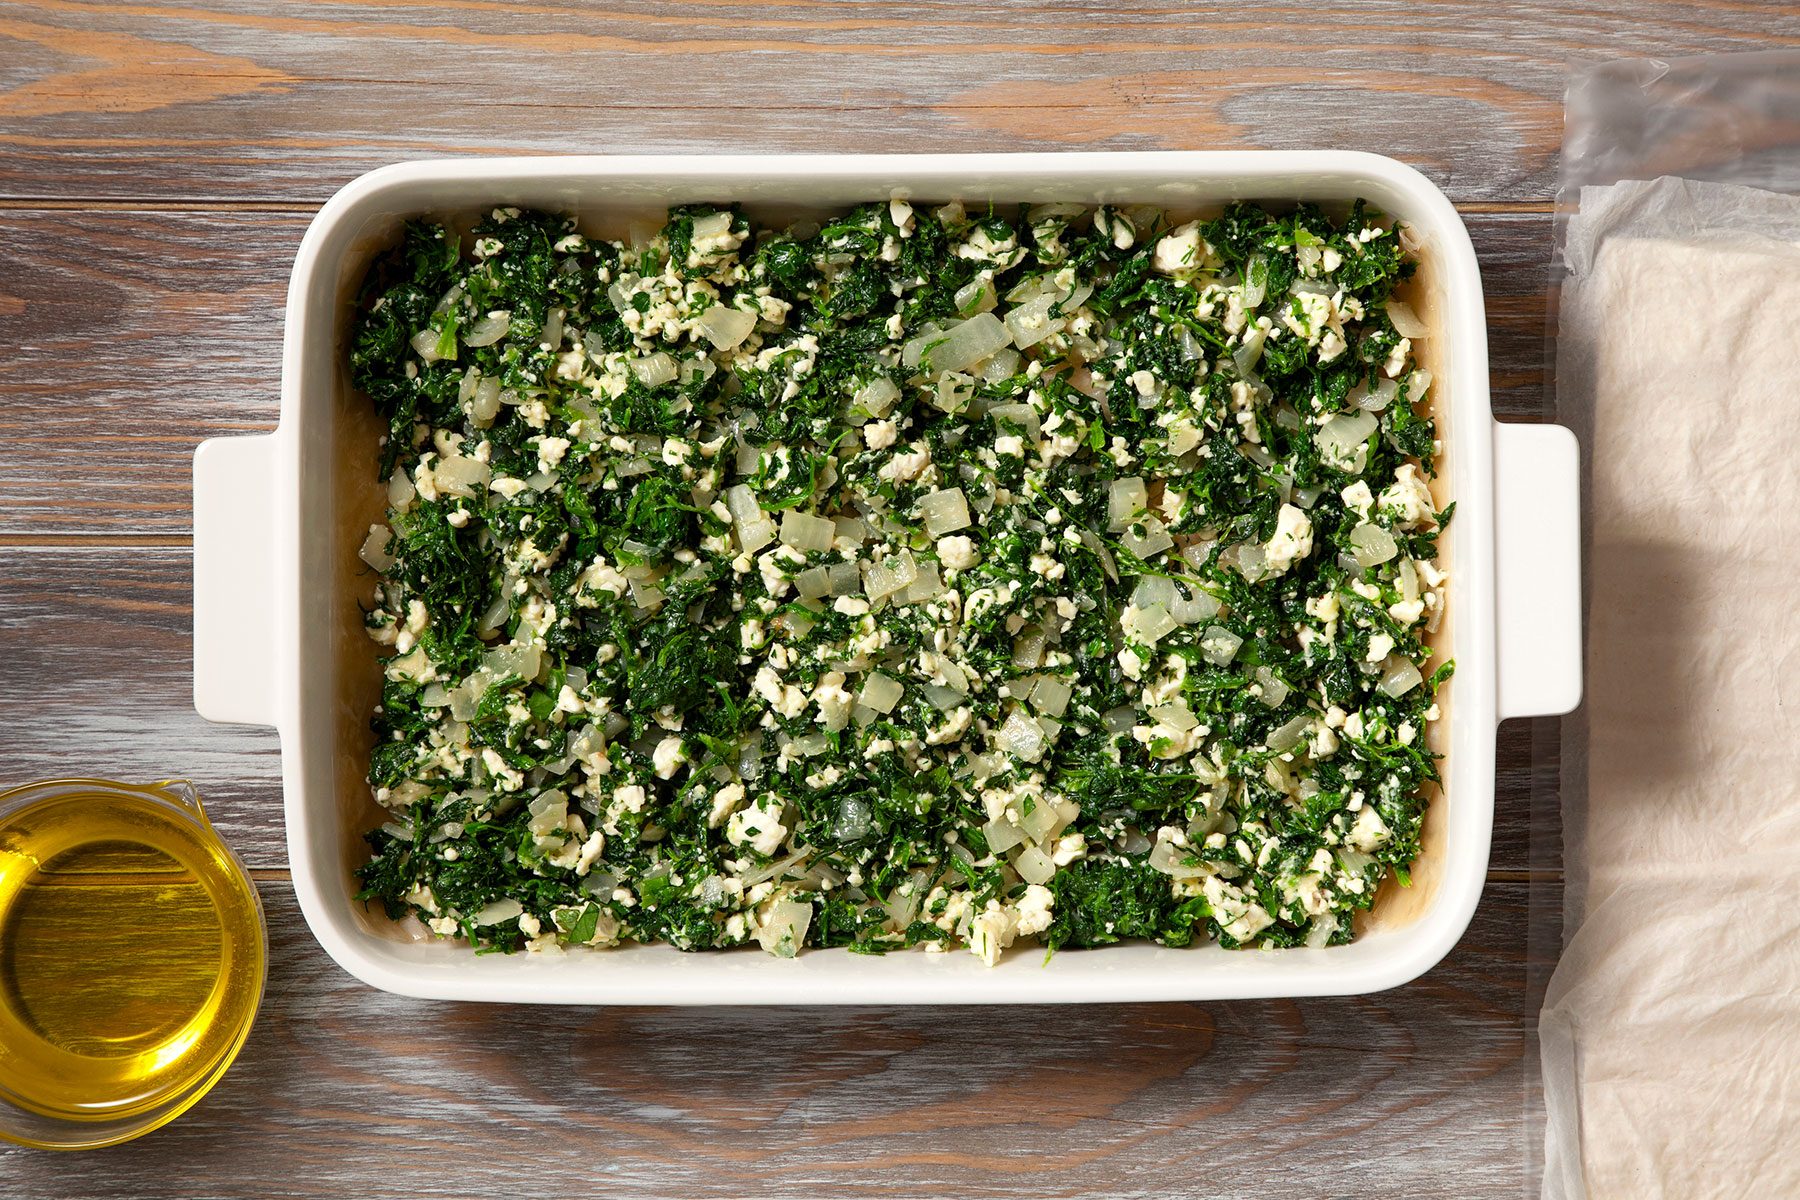 Spreading spinach and onion mixture on brushed dough